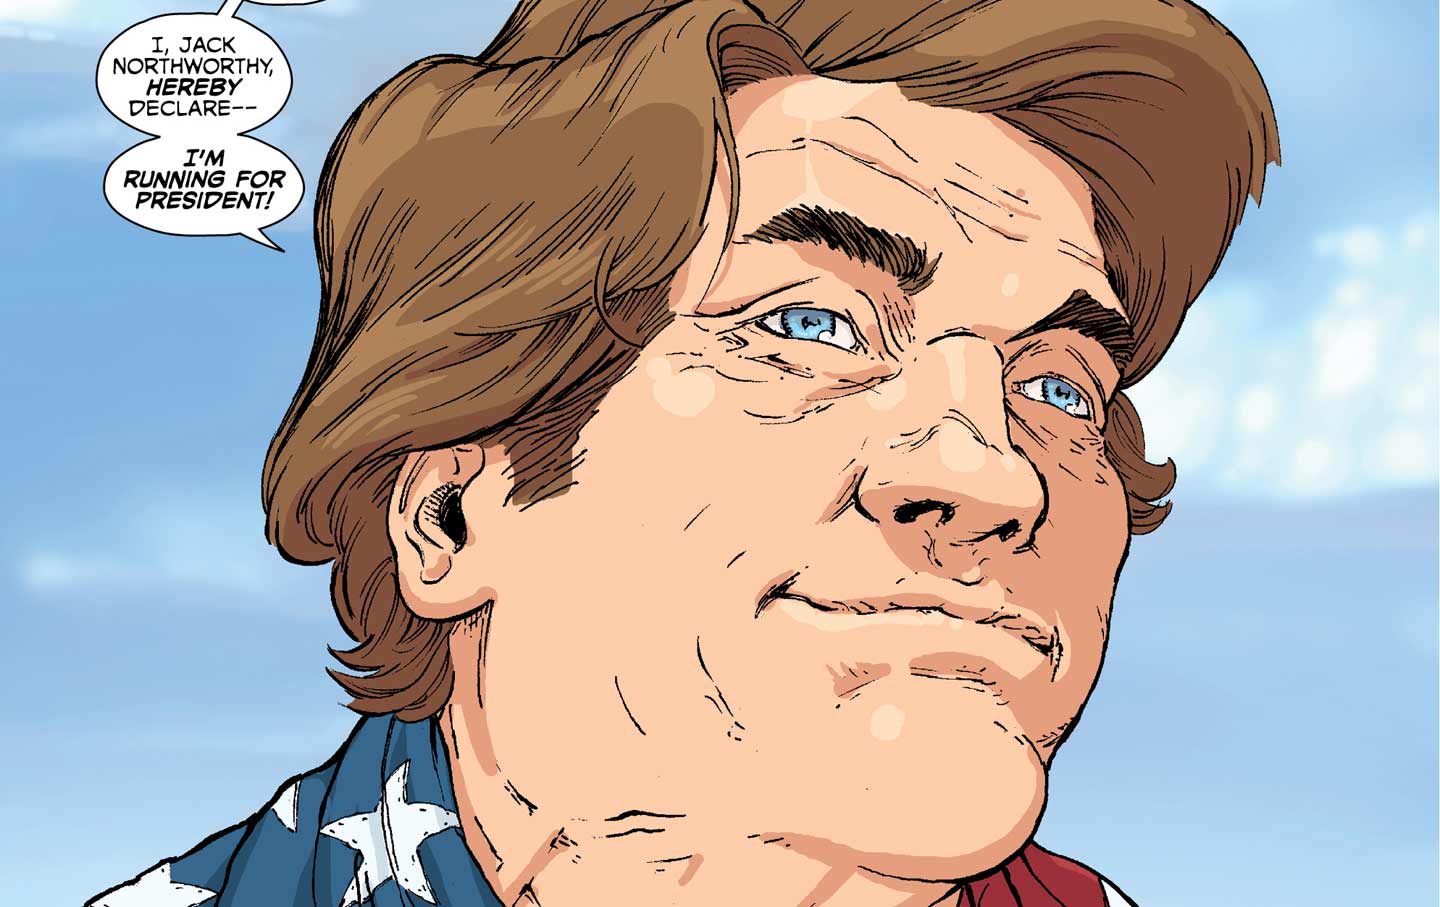 A panel from Image Comics's Citizen Jack featuring satirical presidential candidate Jack Noteworthy.